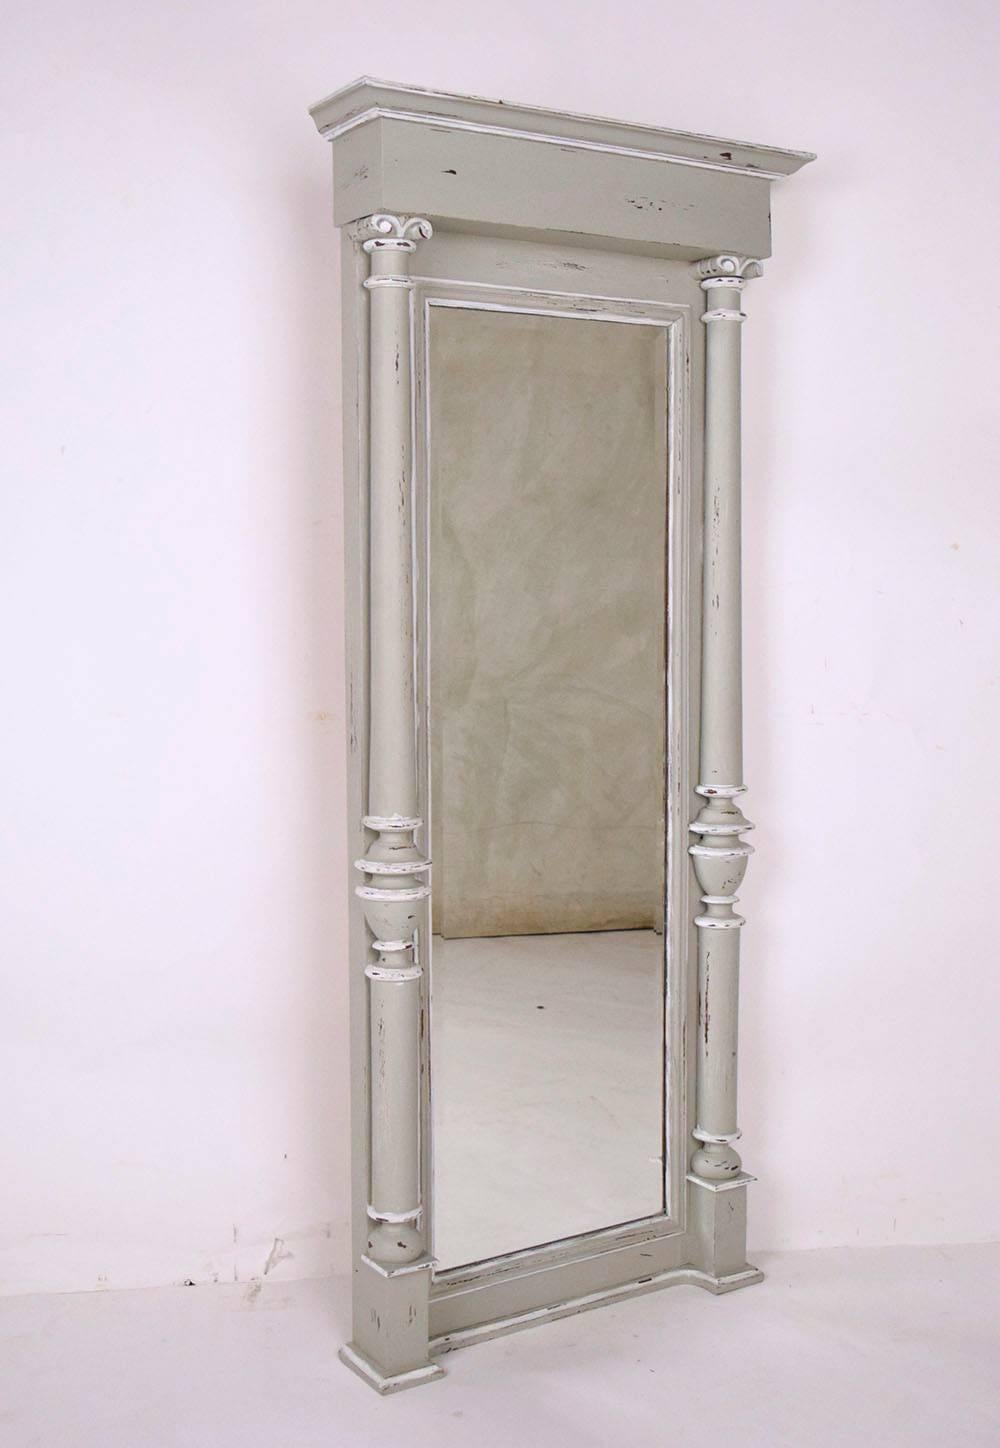 This 1900's French Empire-style standing wall mirror features a solid mahogany wood frame that has been recently painted in a gray and oyster combination with a distressed finish. This full size mirror is elegantly designed using architectural